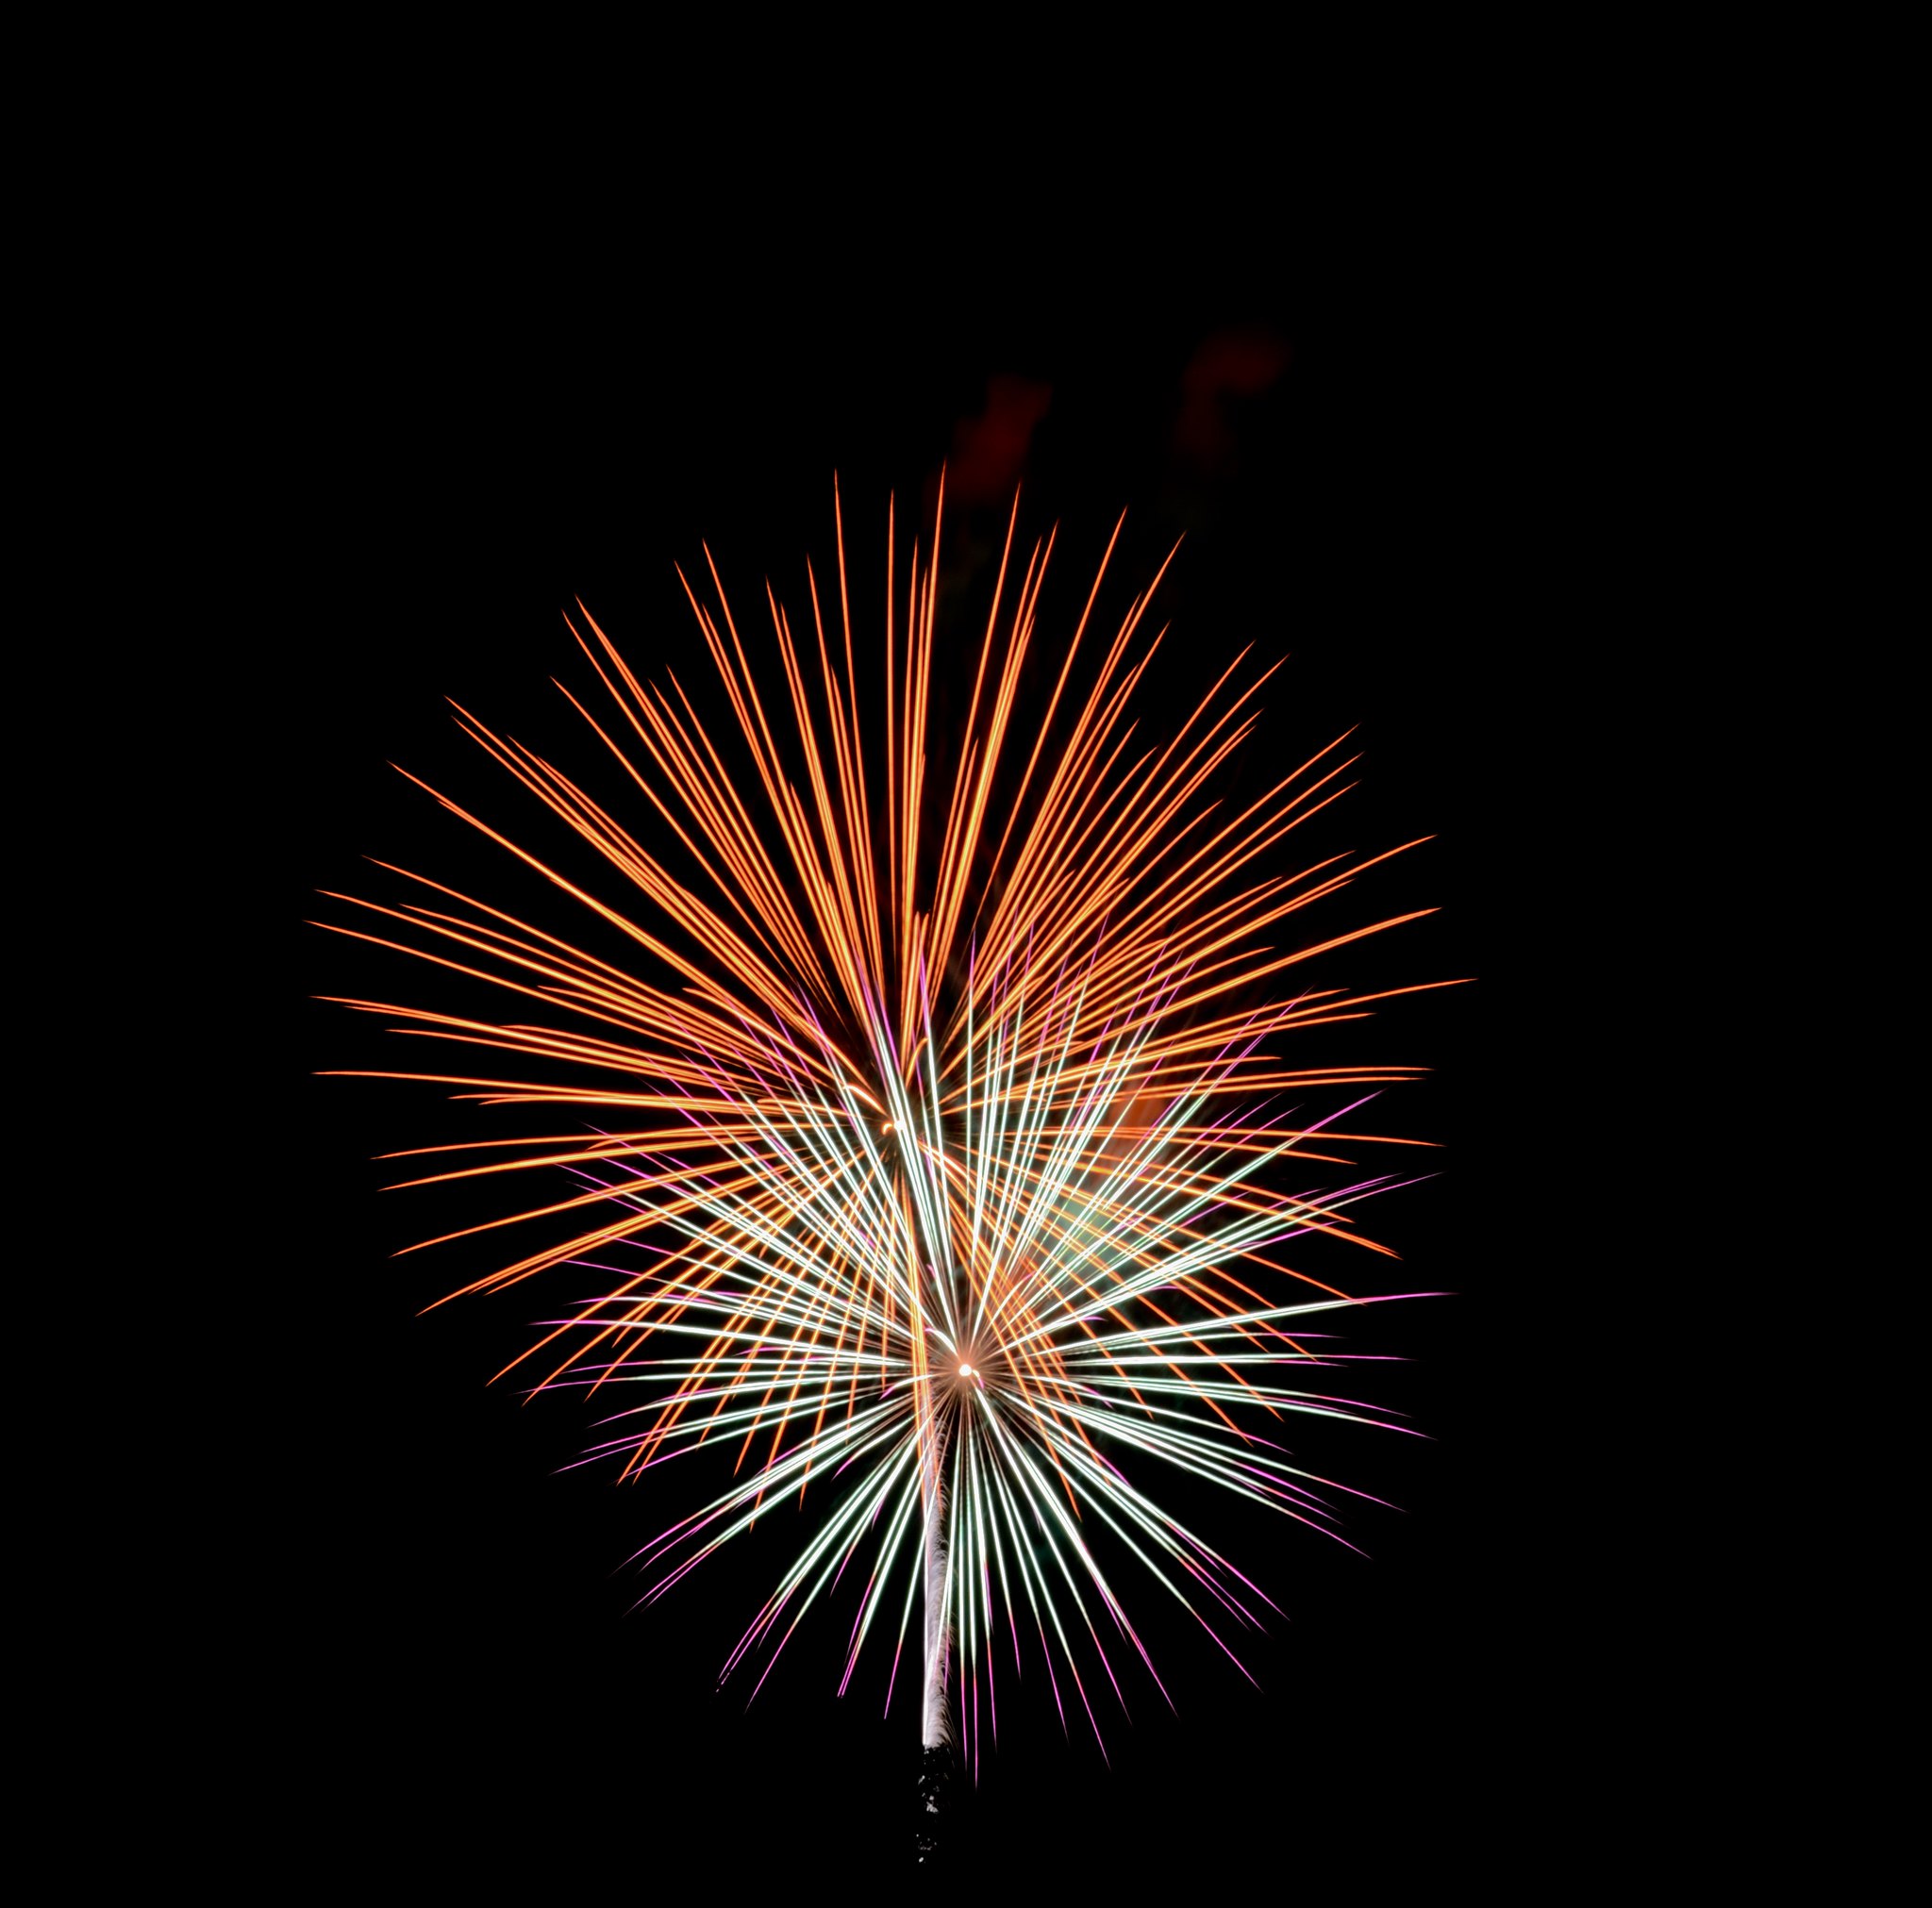 holidays, handsomely, salute, black, sparks, glow, it's beautiful wallpaper for mobile